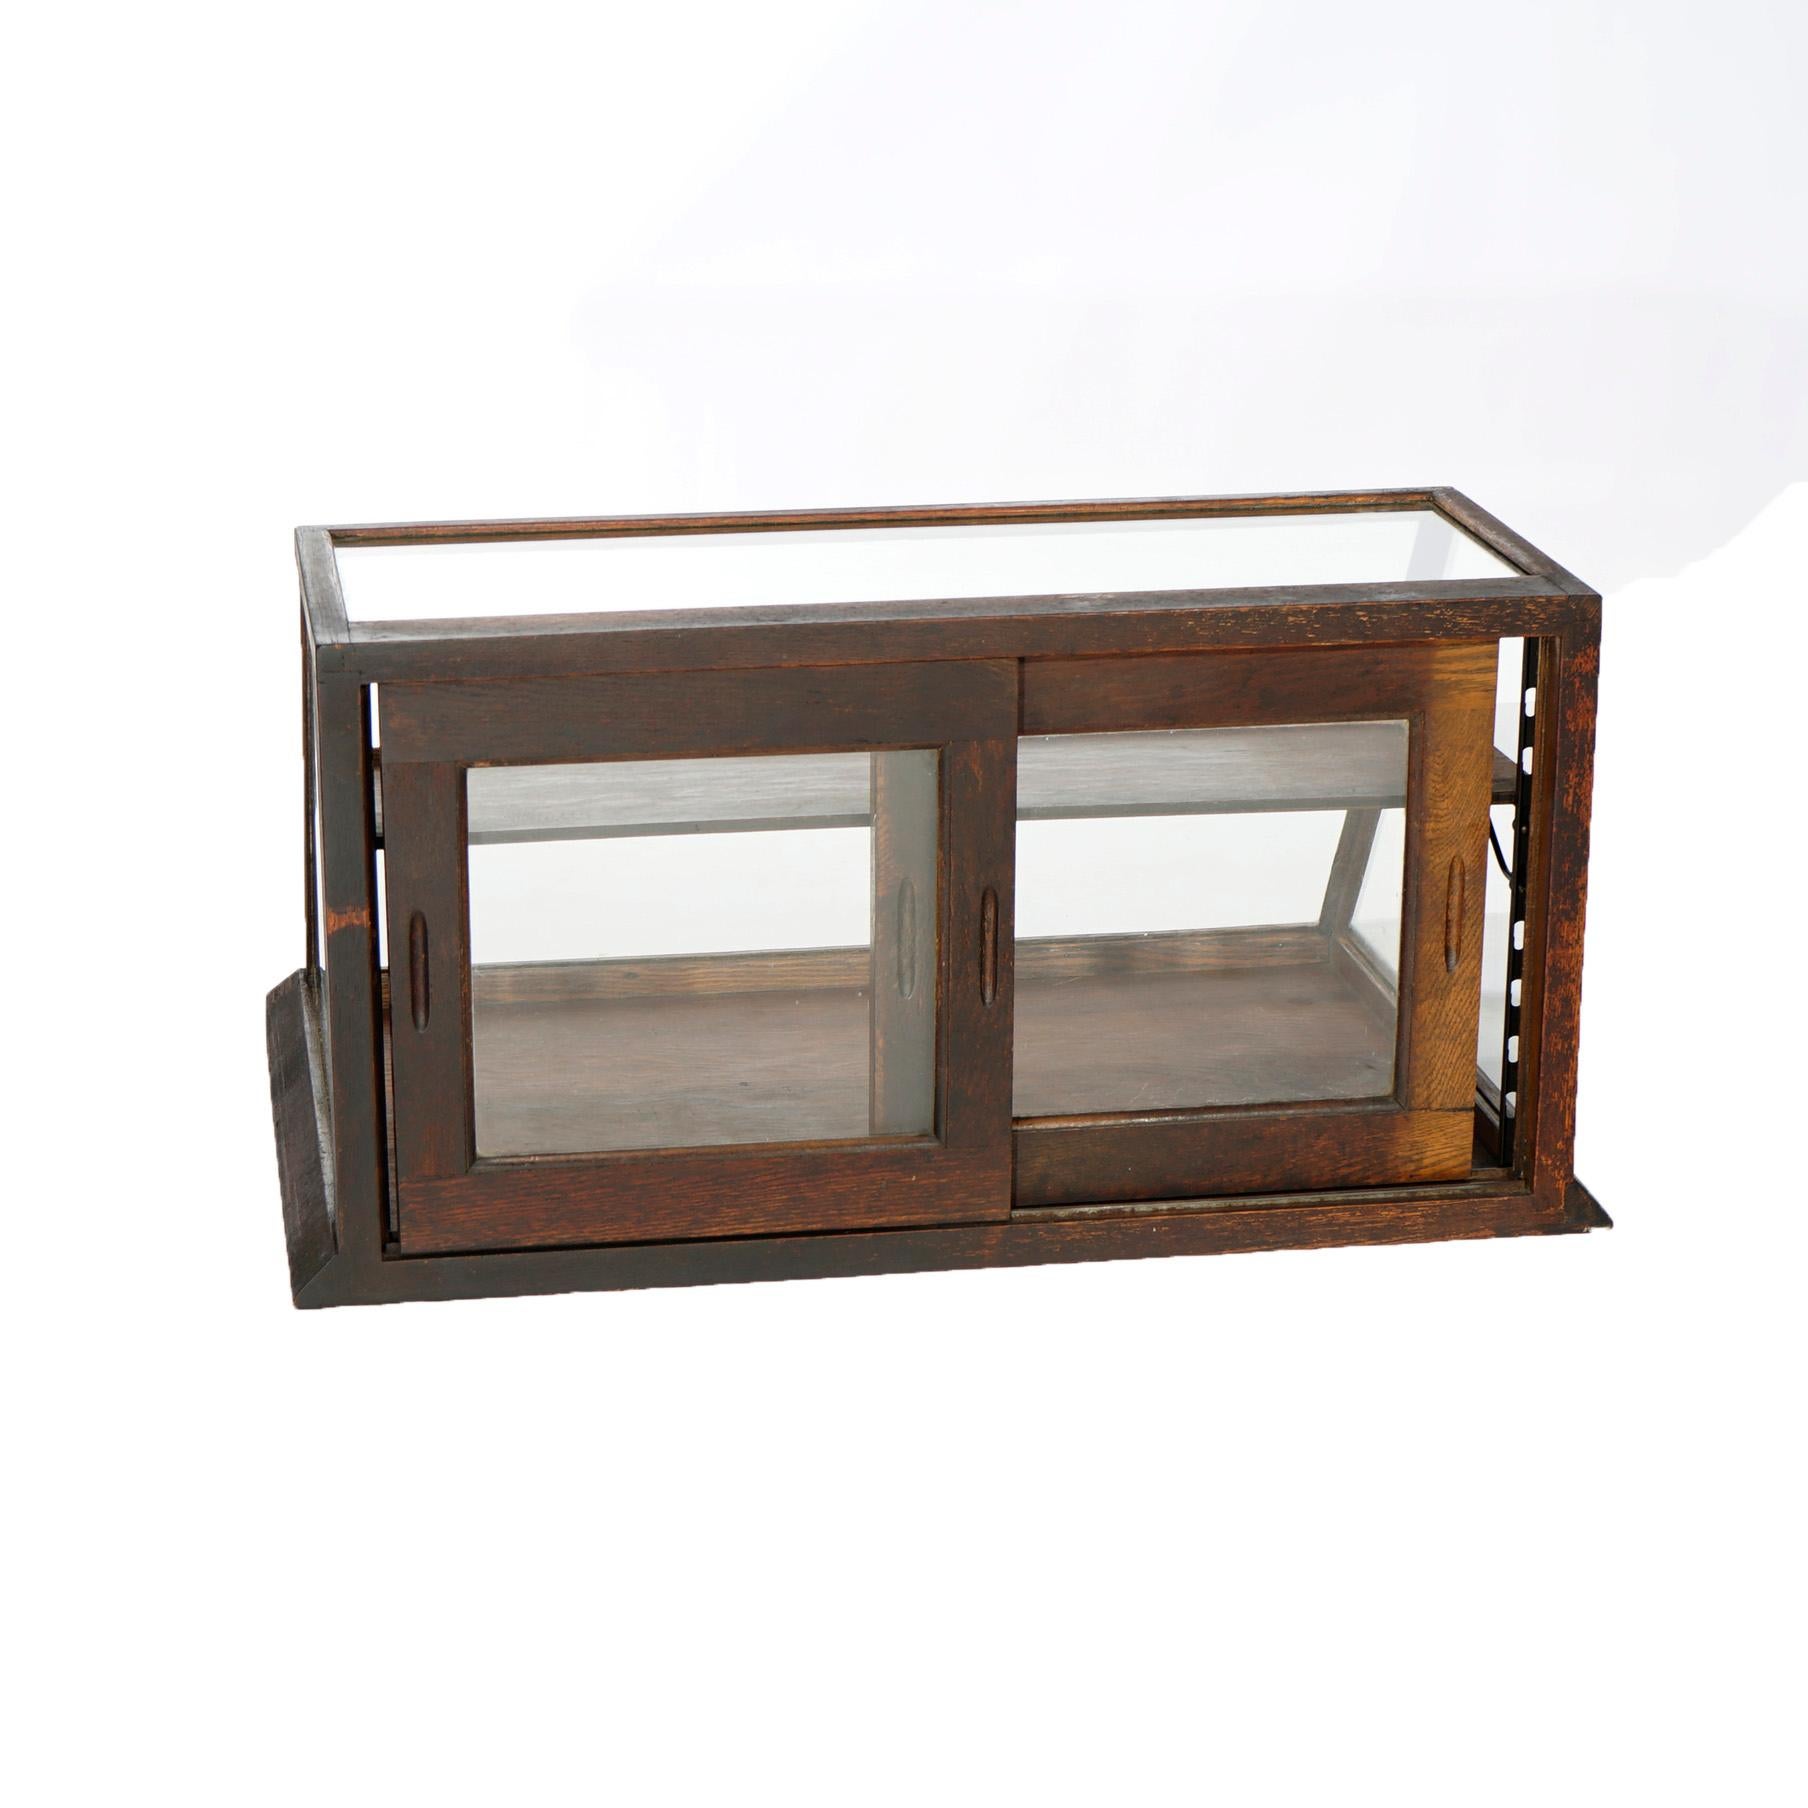 American Antique Country Store Table Top Oak Slant Front Display Showcase, circa 1910